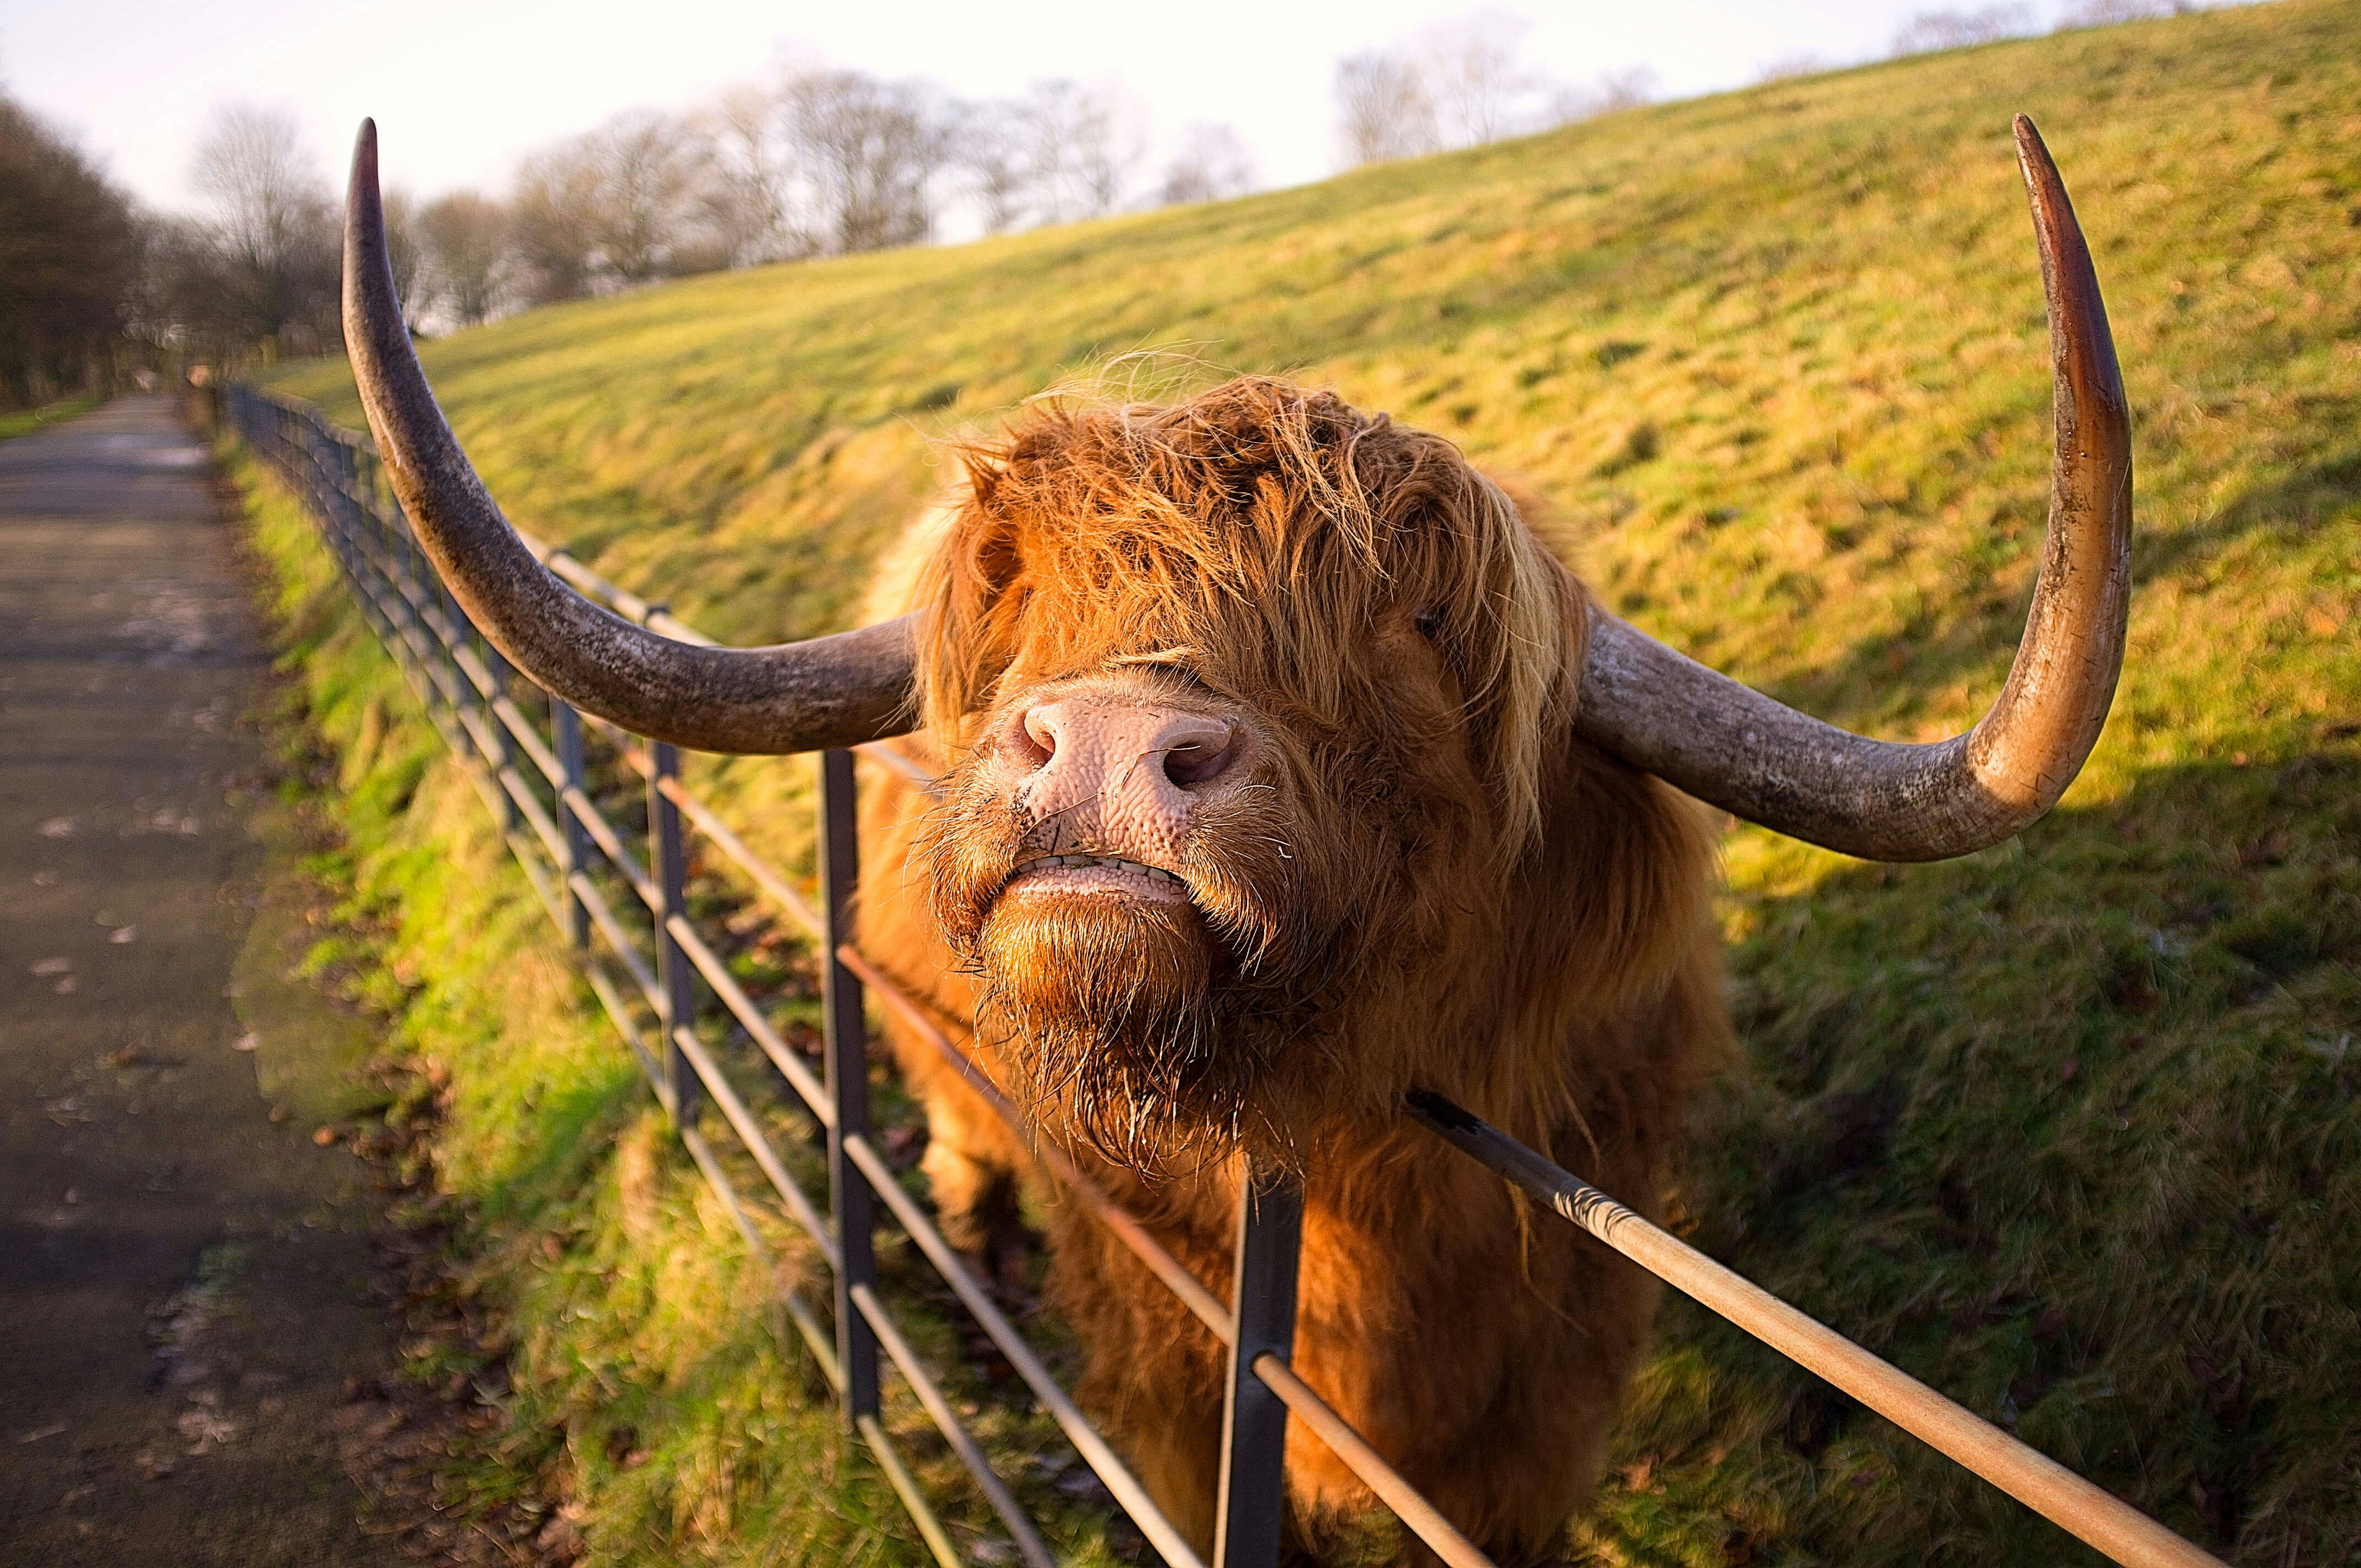 A wooly, horned highland cow in Heaton park, Manchester